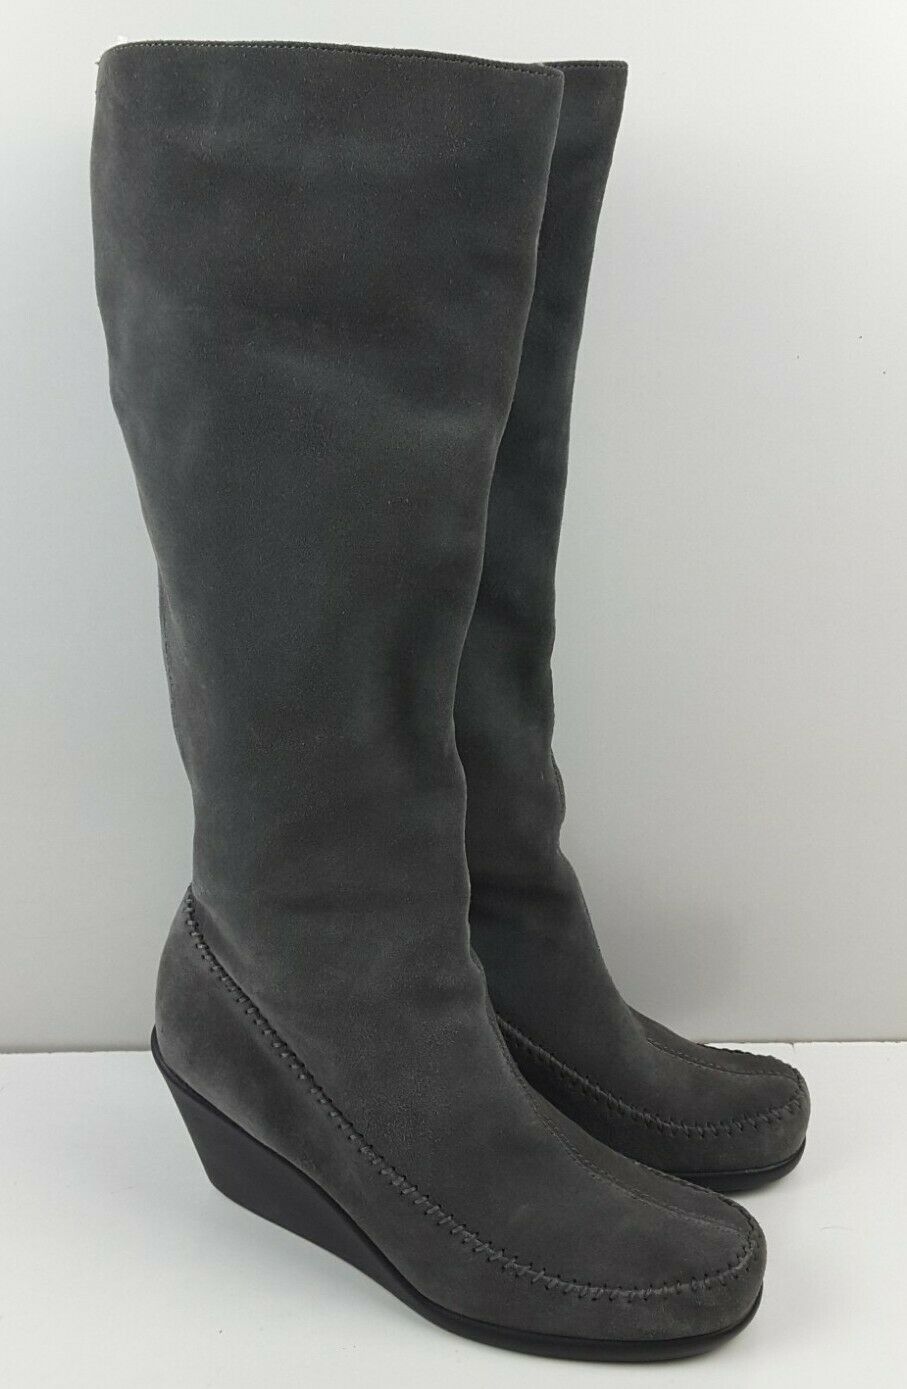 Aerosoles Gather Round Suede Side Zip Wedge Tall Boots Shoes Grey Size 9M